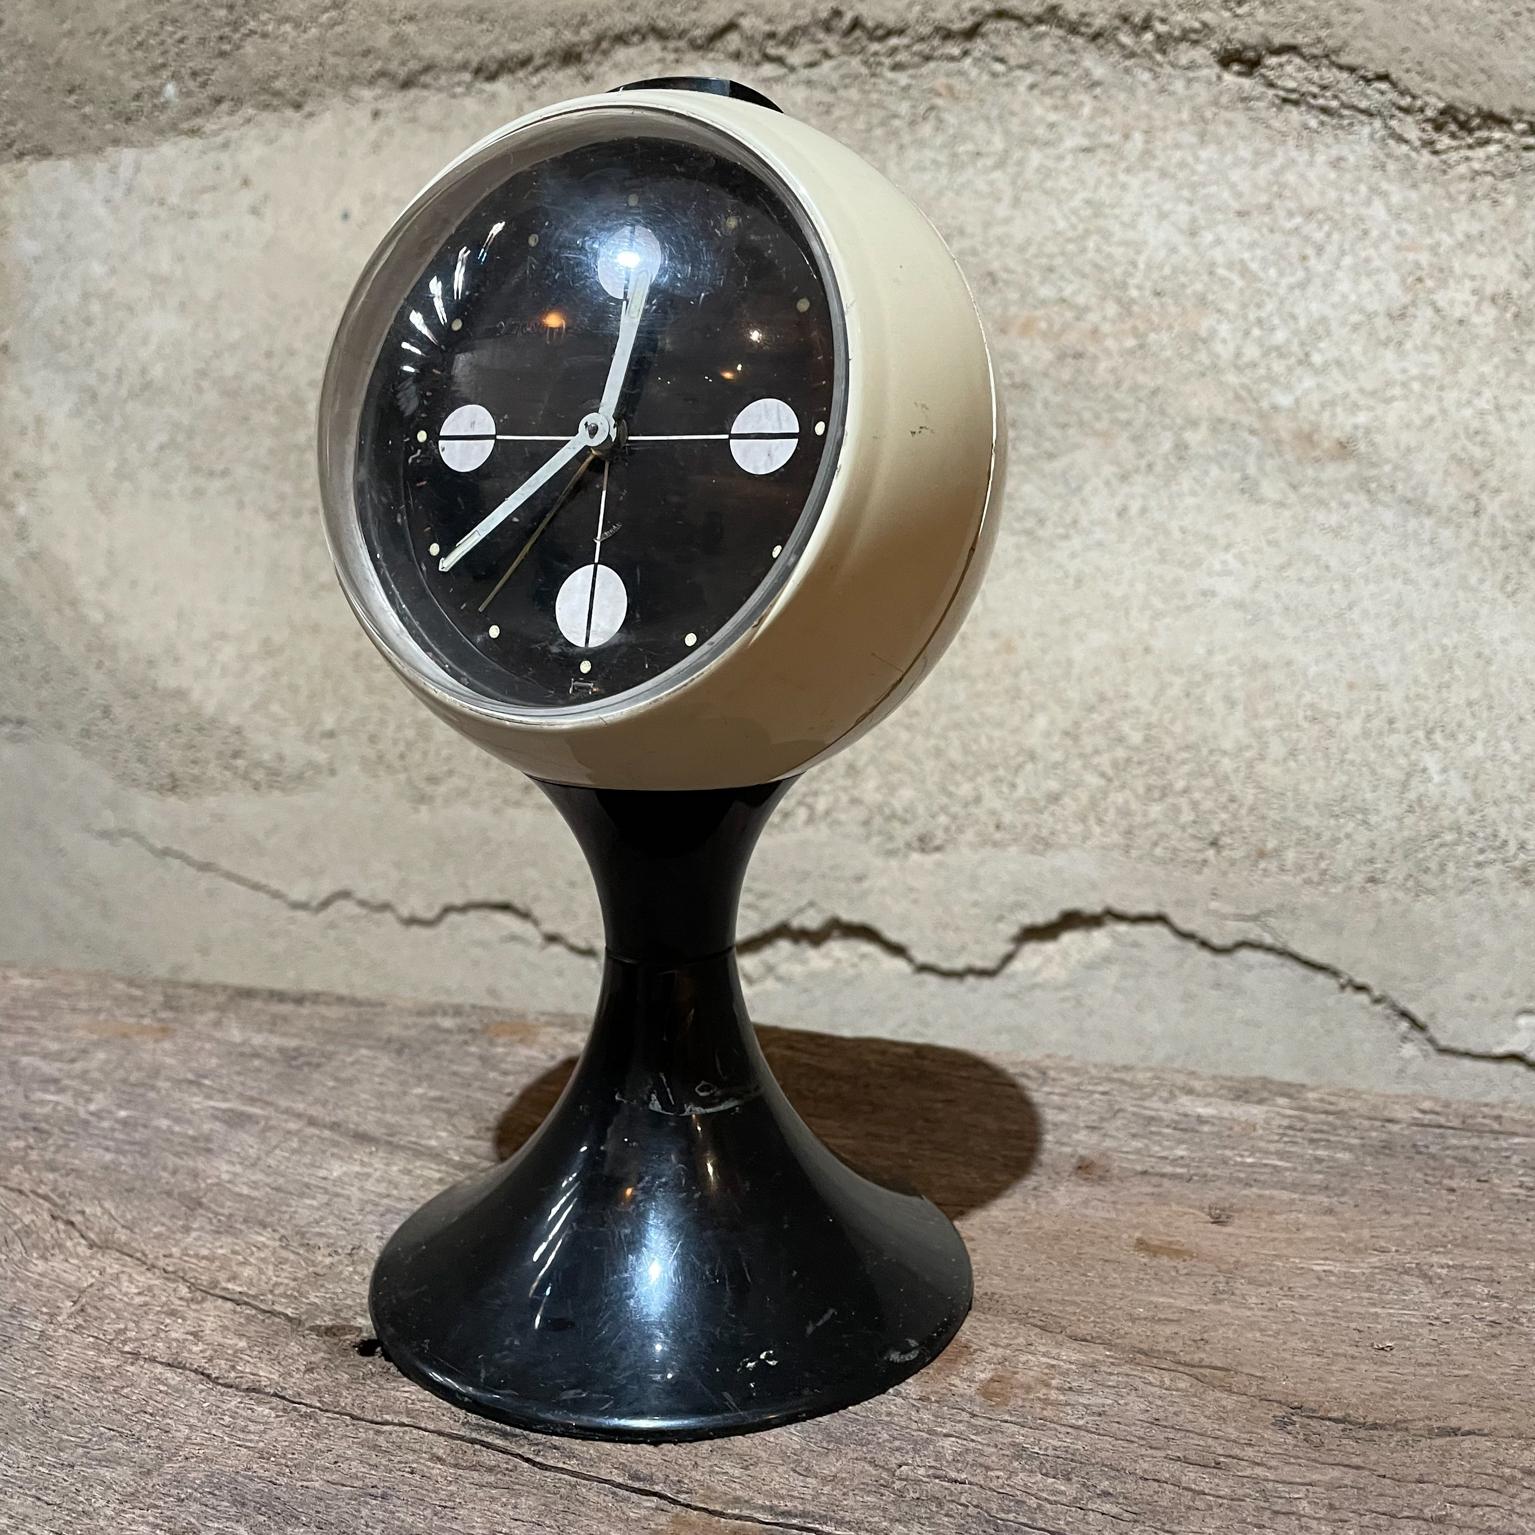 Atomic Age Westclox vintage pedestal tulip table clock in black & white Mid-Century Modern 1960s
Measures: 8.5 tall x 4.5 diameter
Unrestored vintage condition preowned. Scratches and nicks present. Not in working order.
 